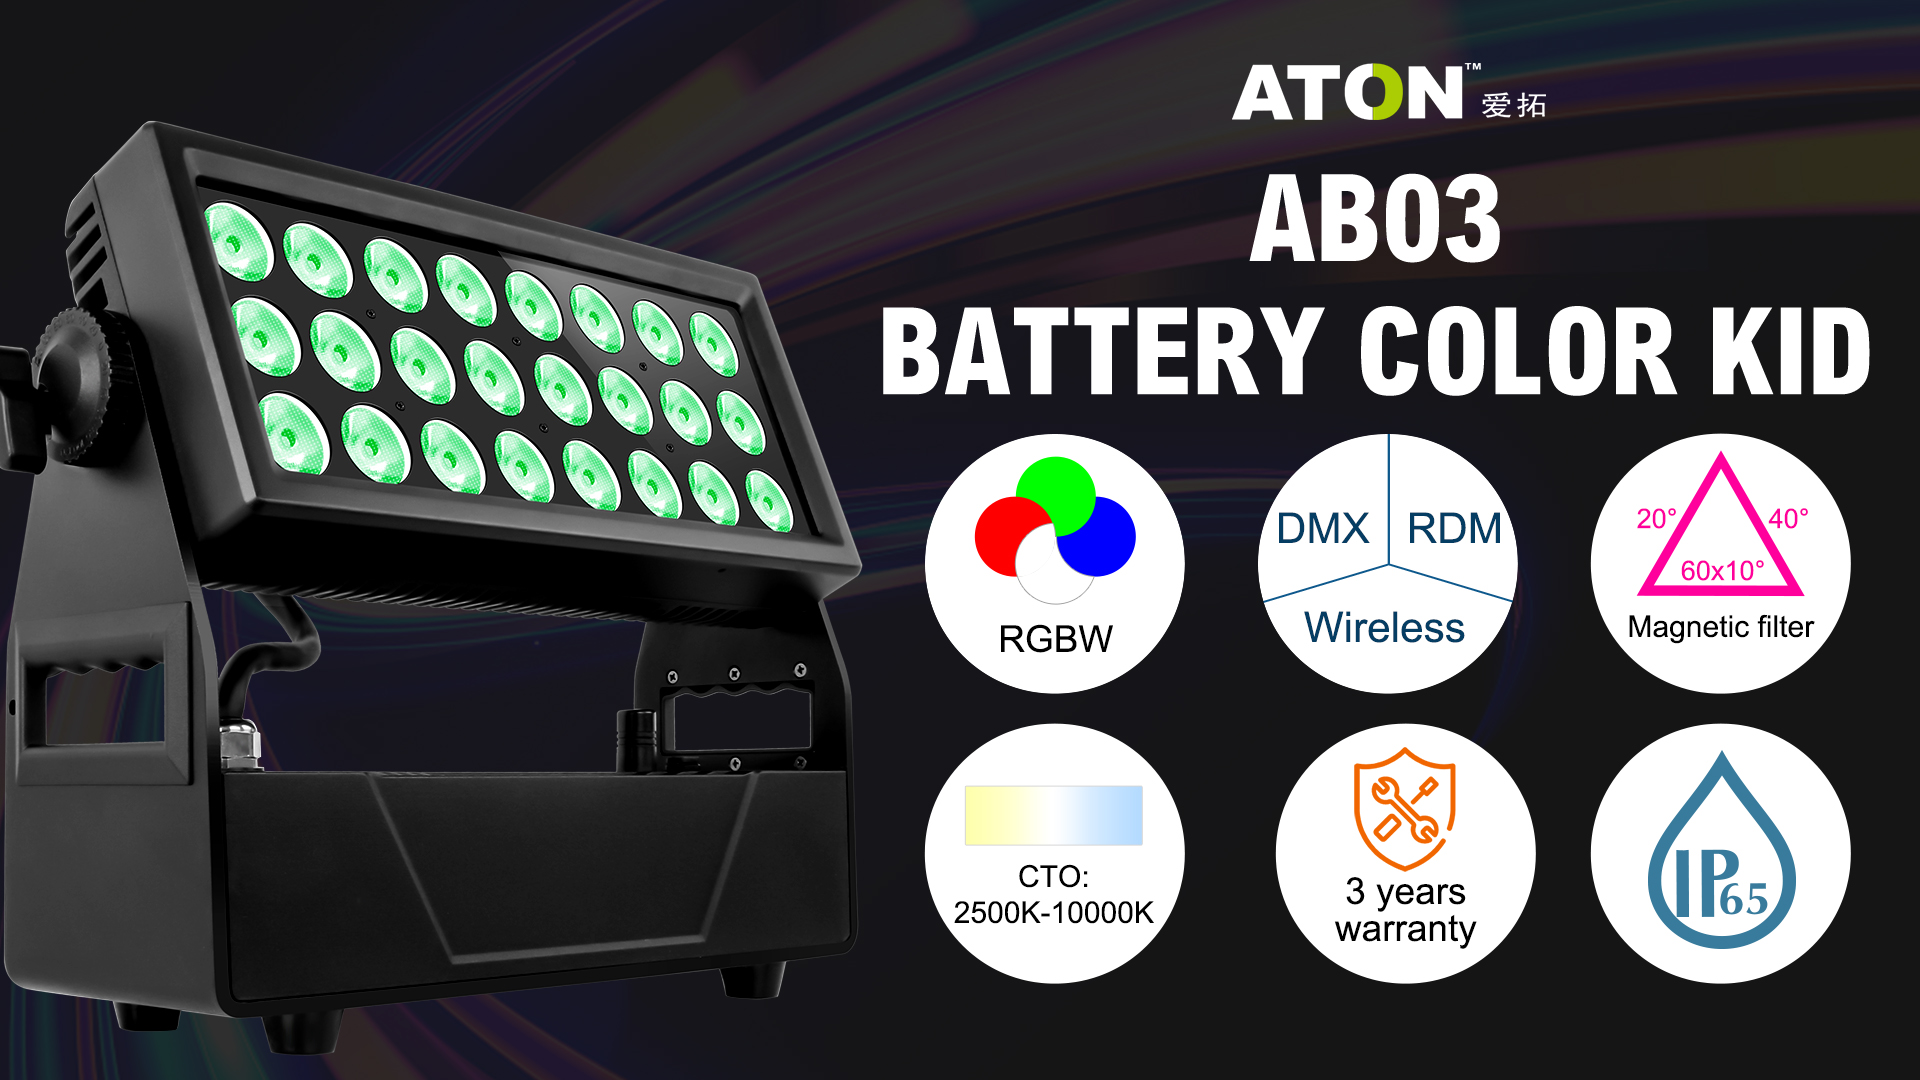 AB03 Battery Color Kid